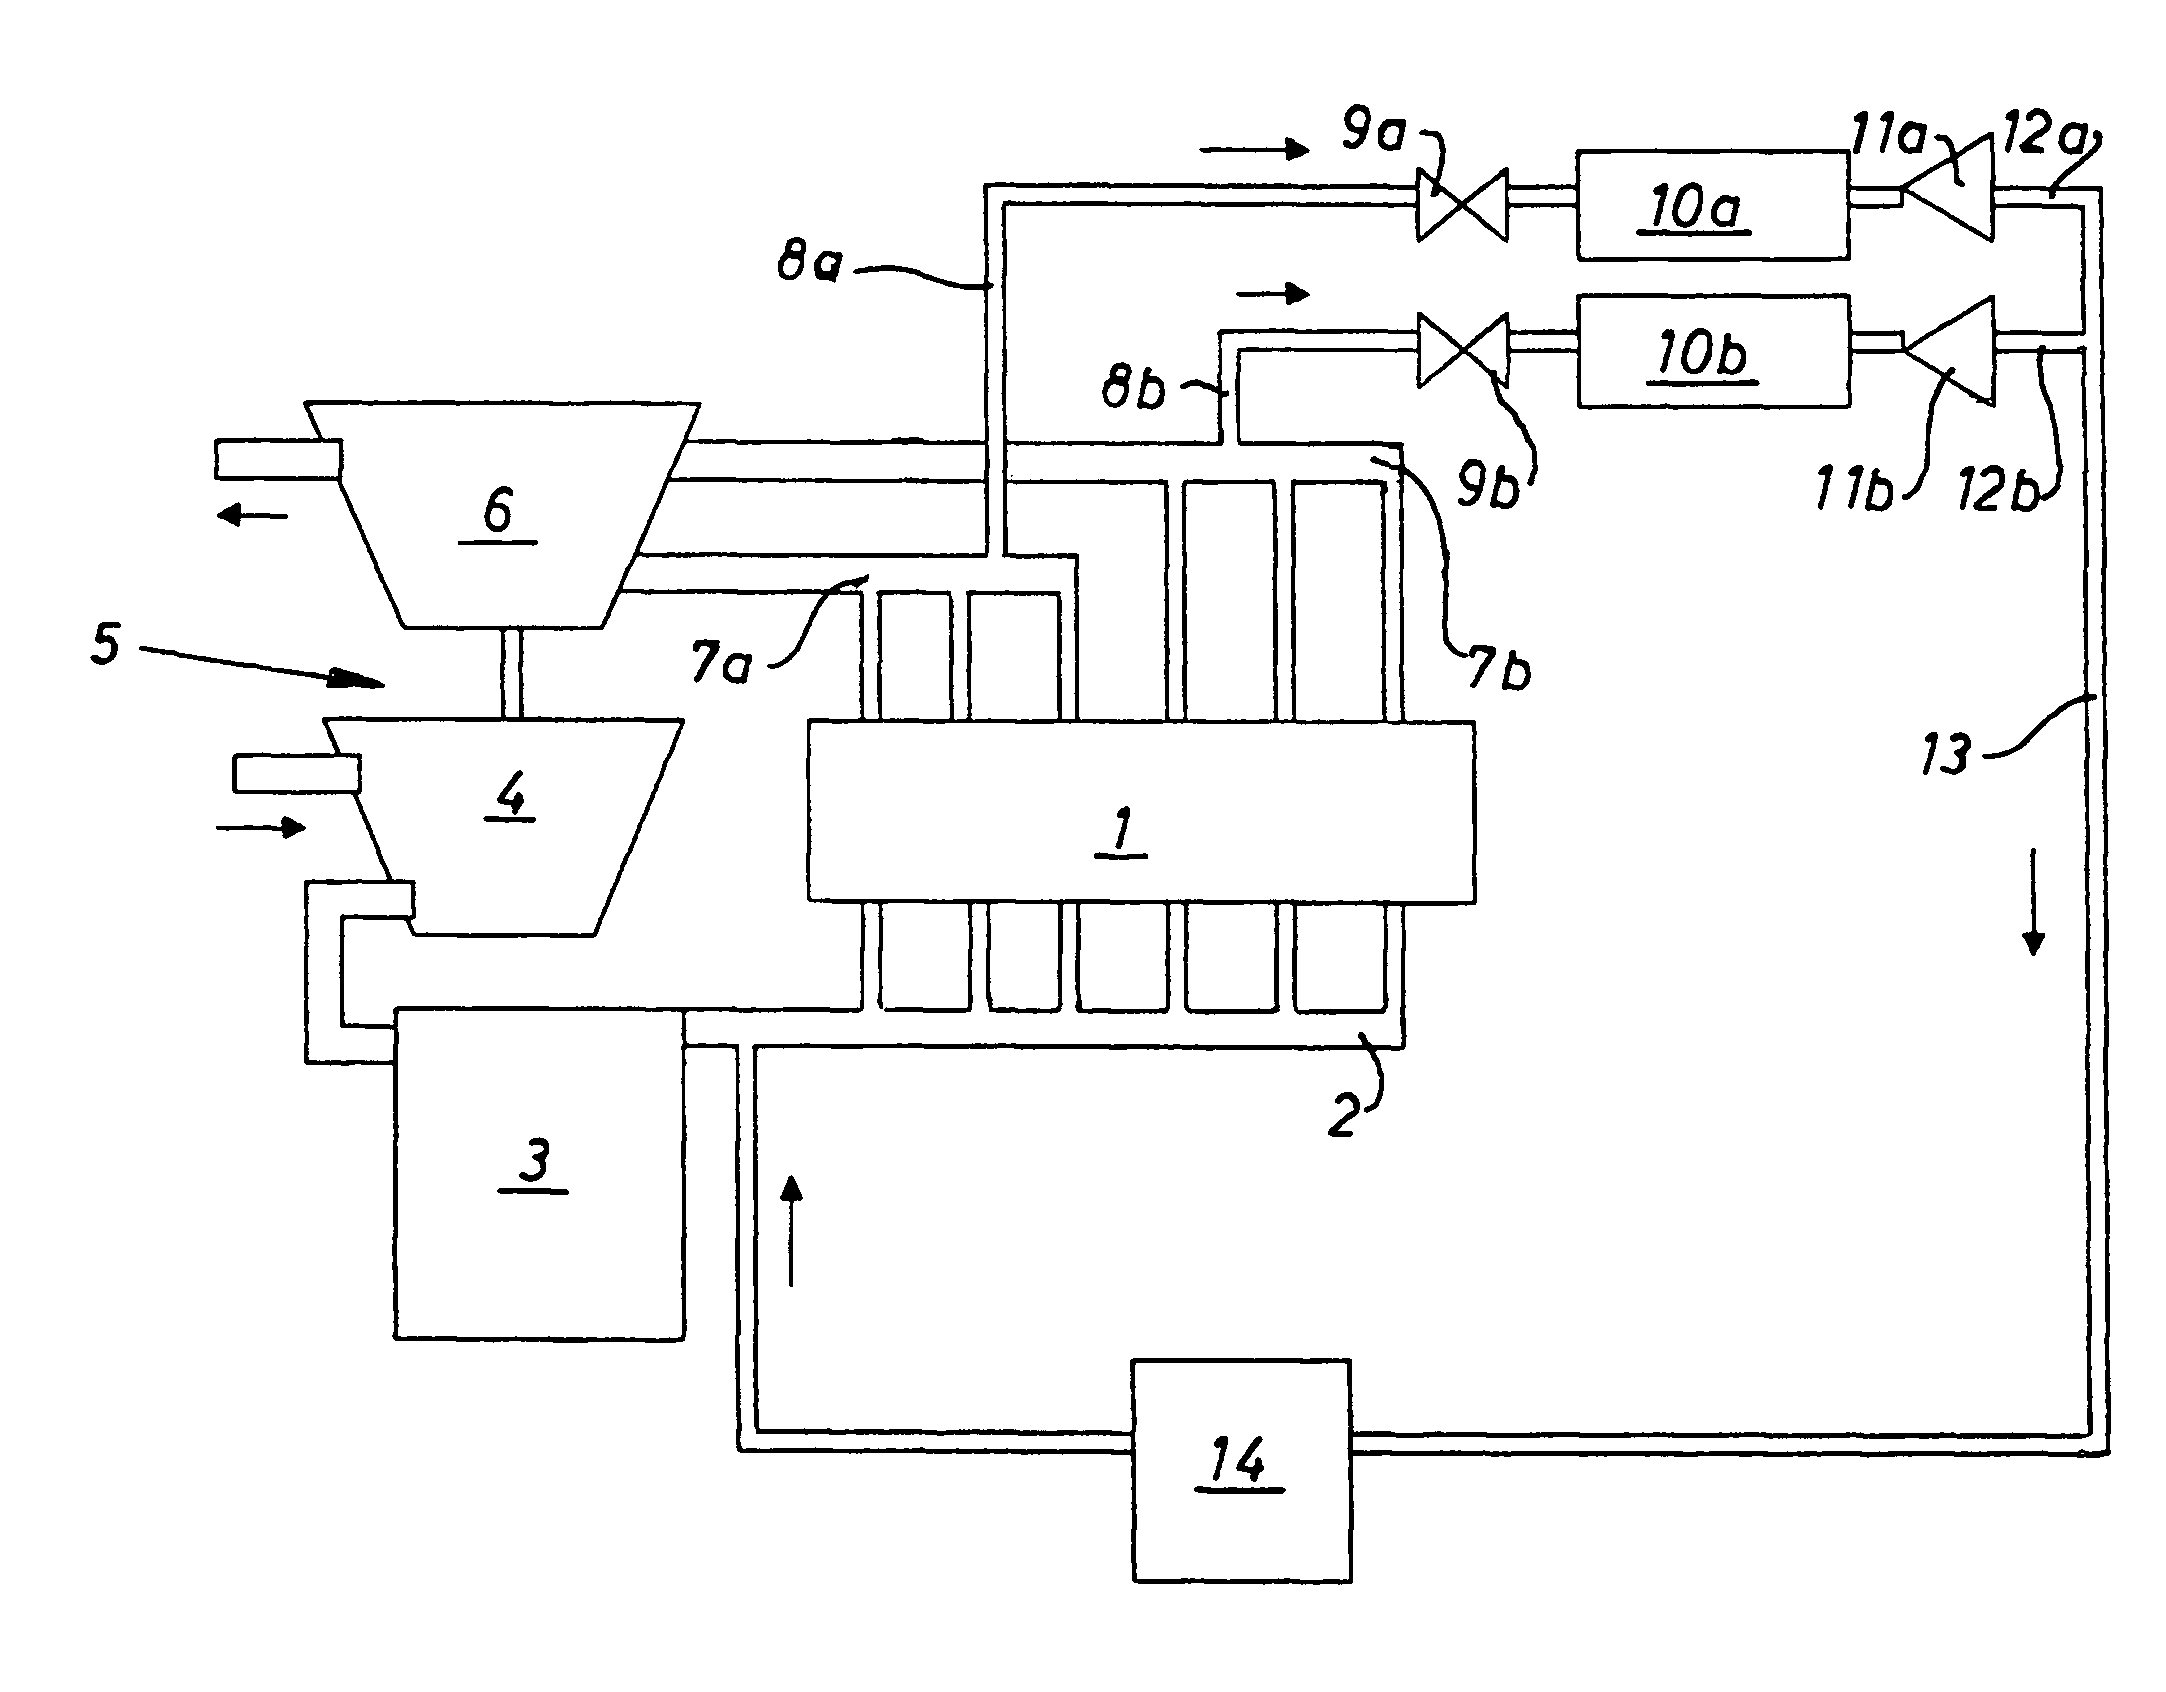 Two-stage cooled exhaust gas recirculation system